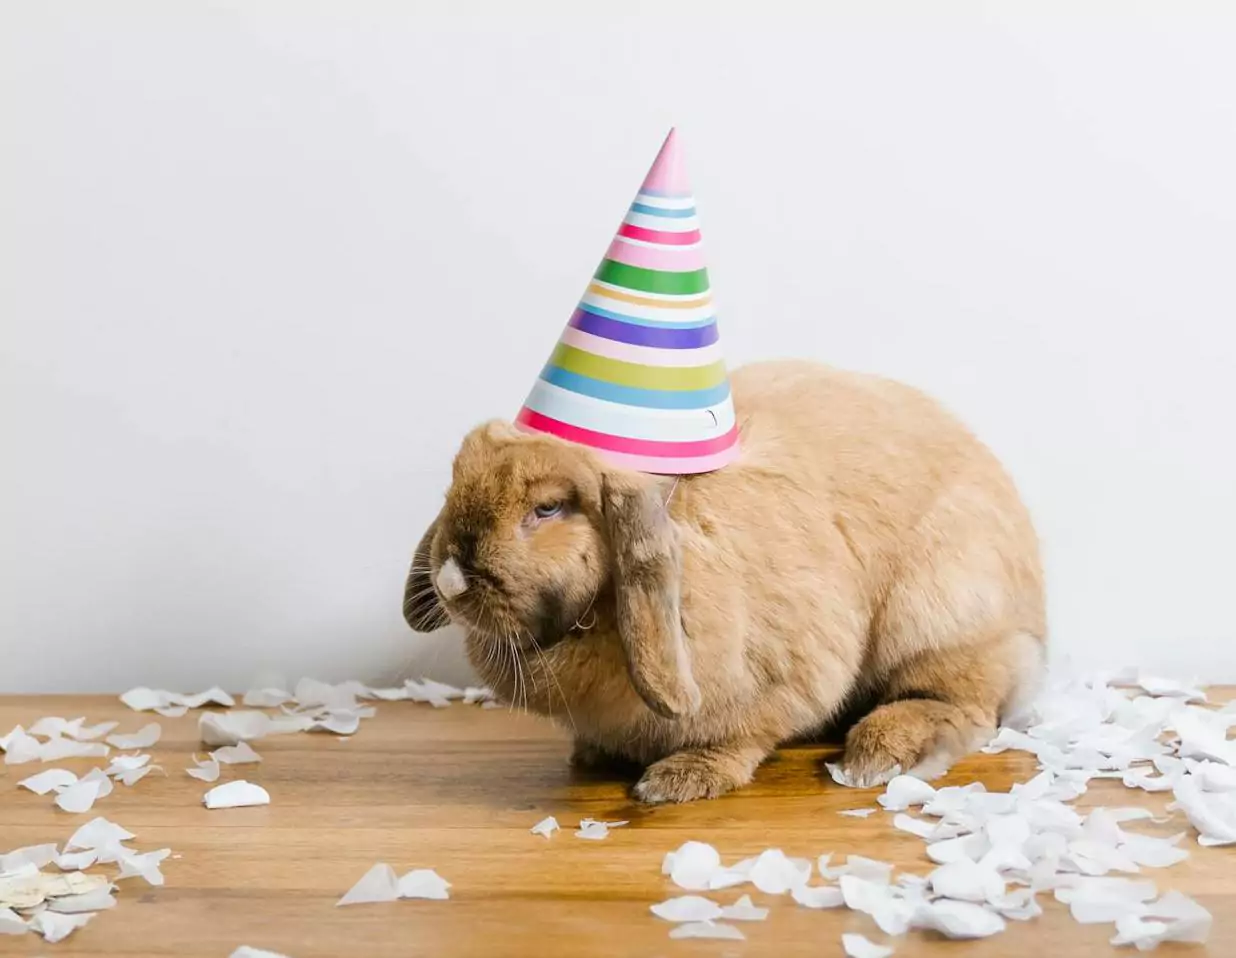 Bunny with Birthday hat - How long do rabbits live